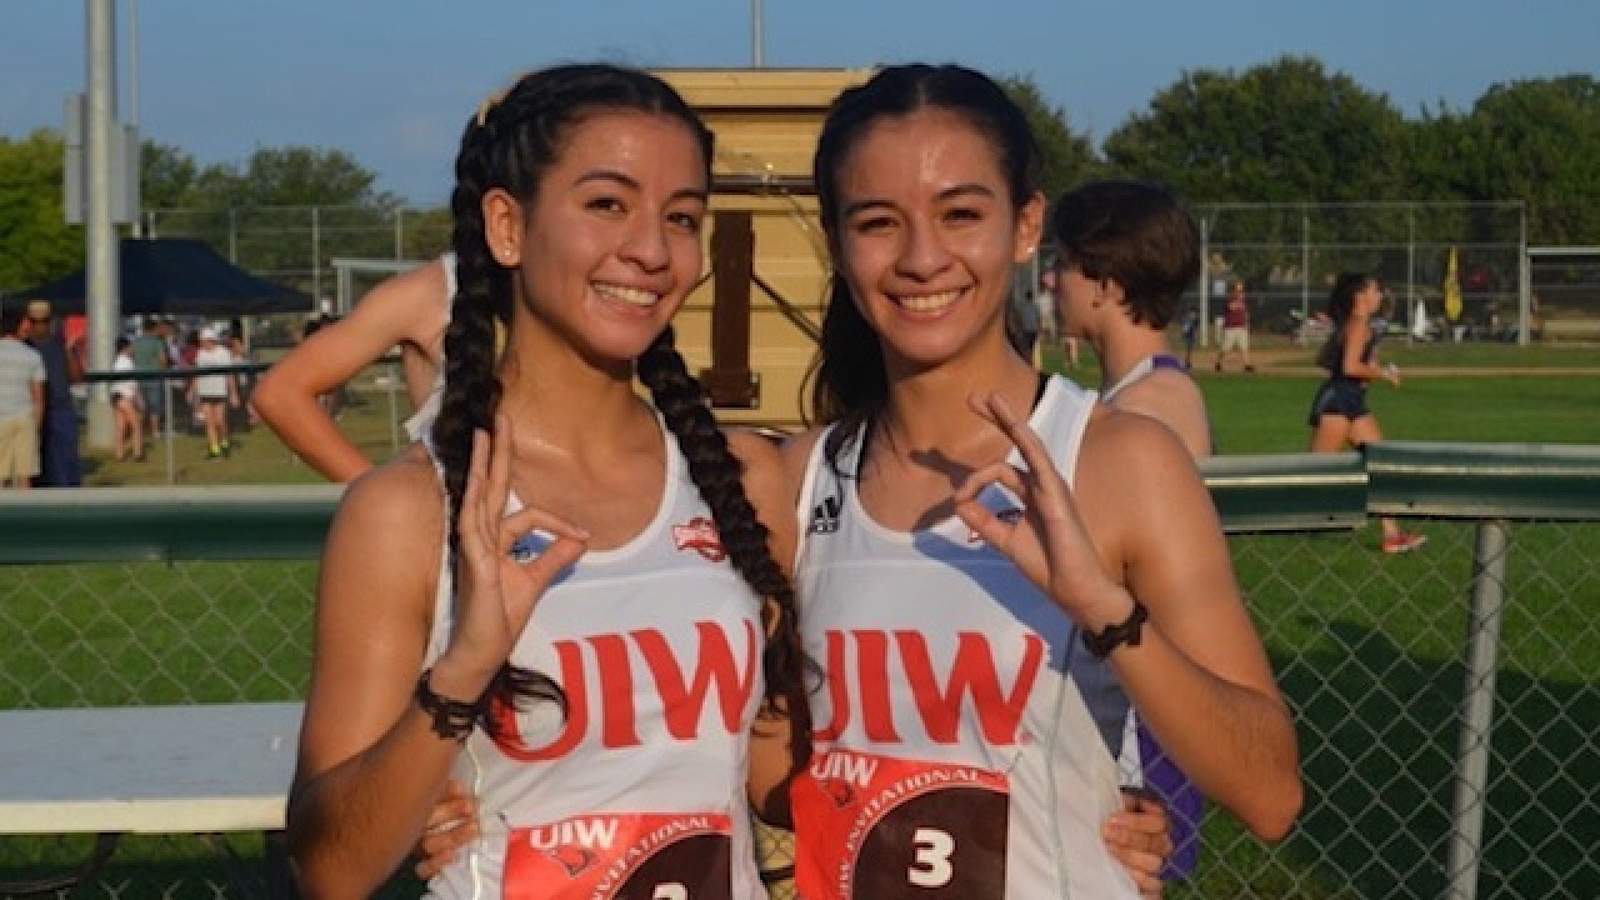 Seeing double: three pairs of twins compete in UIW athletics